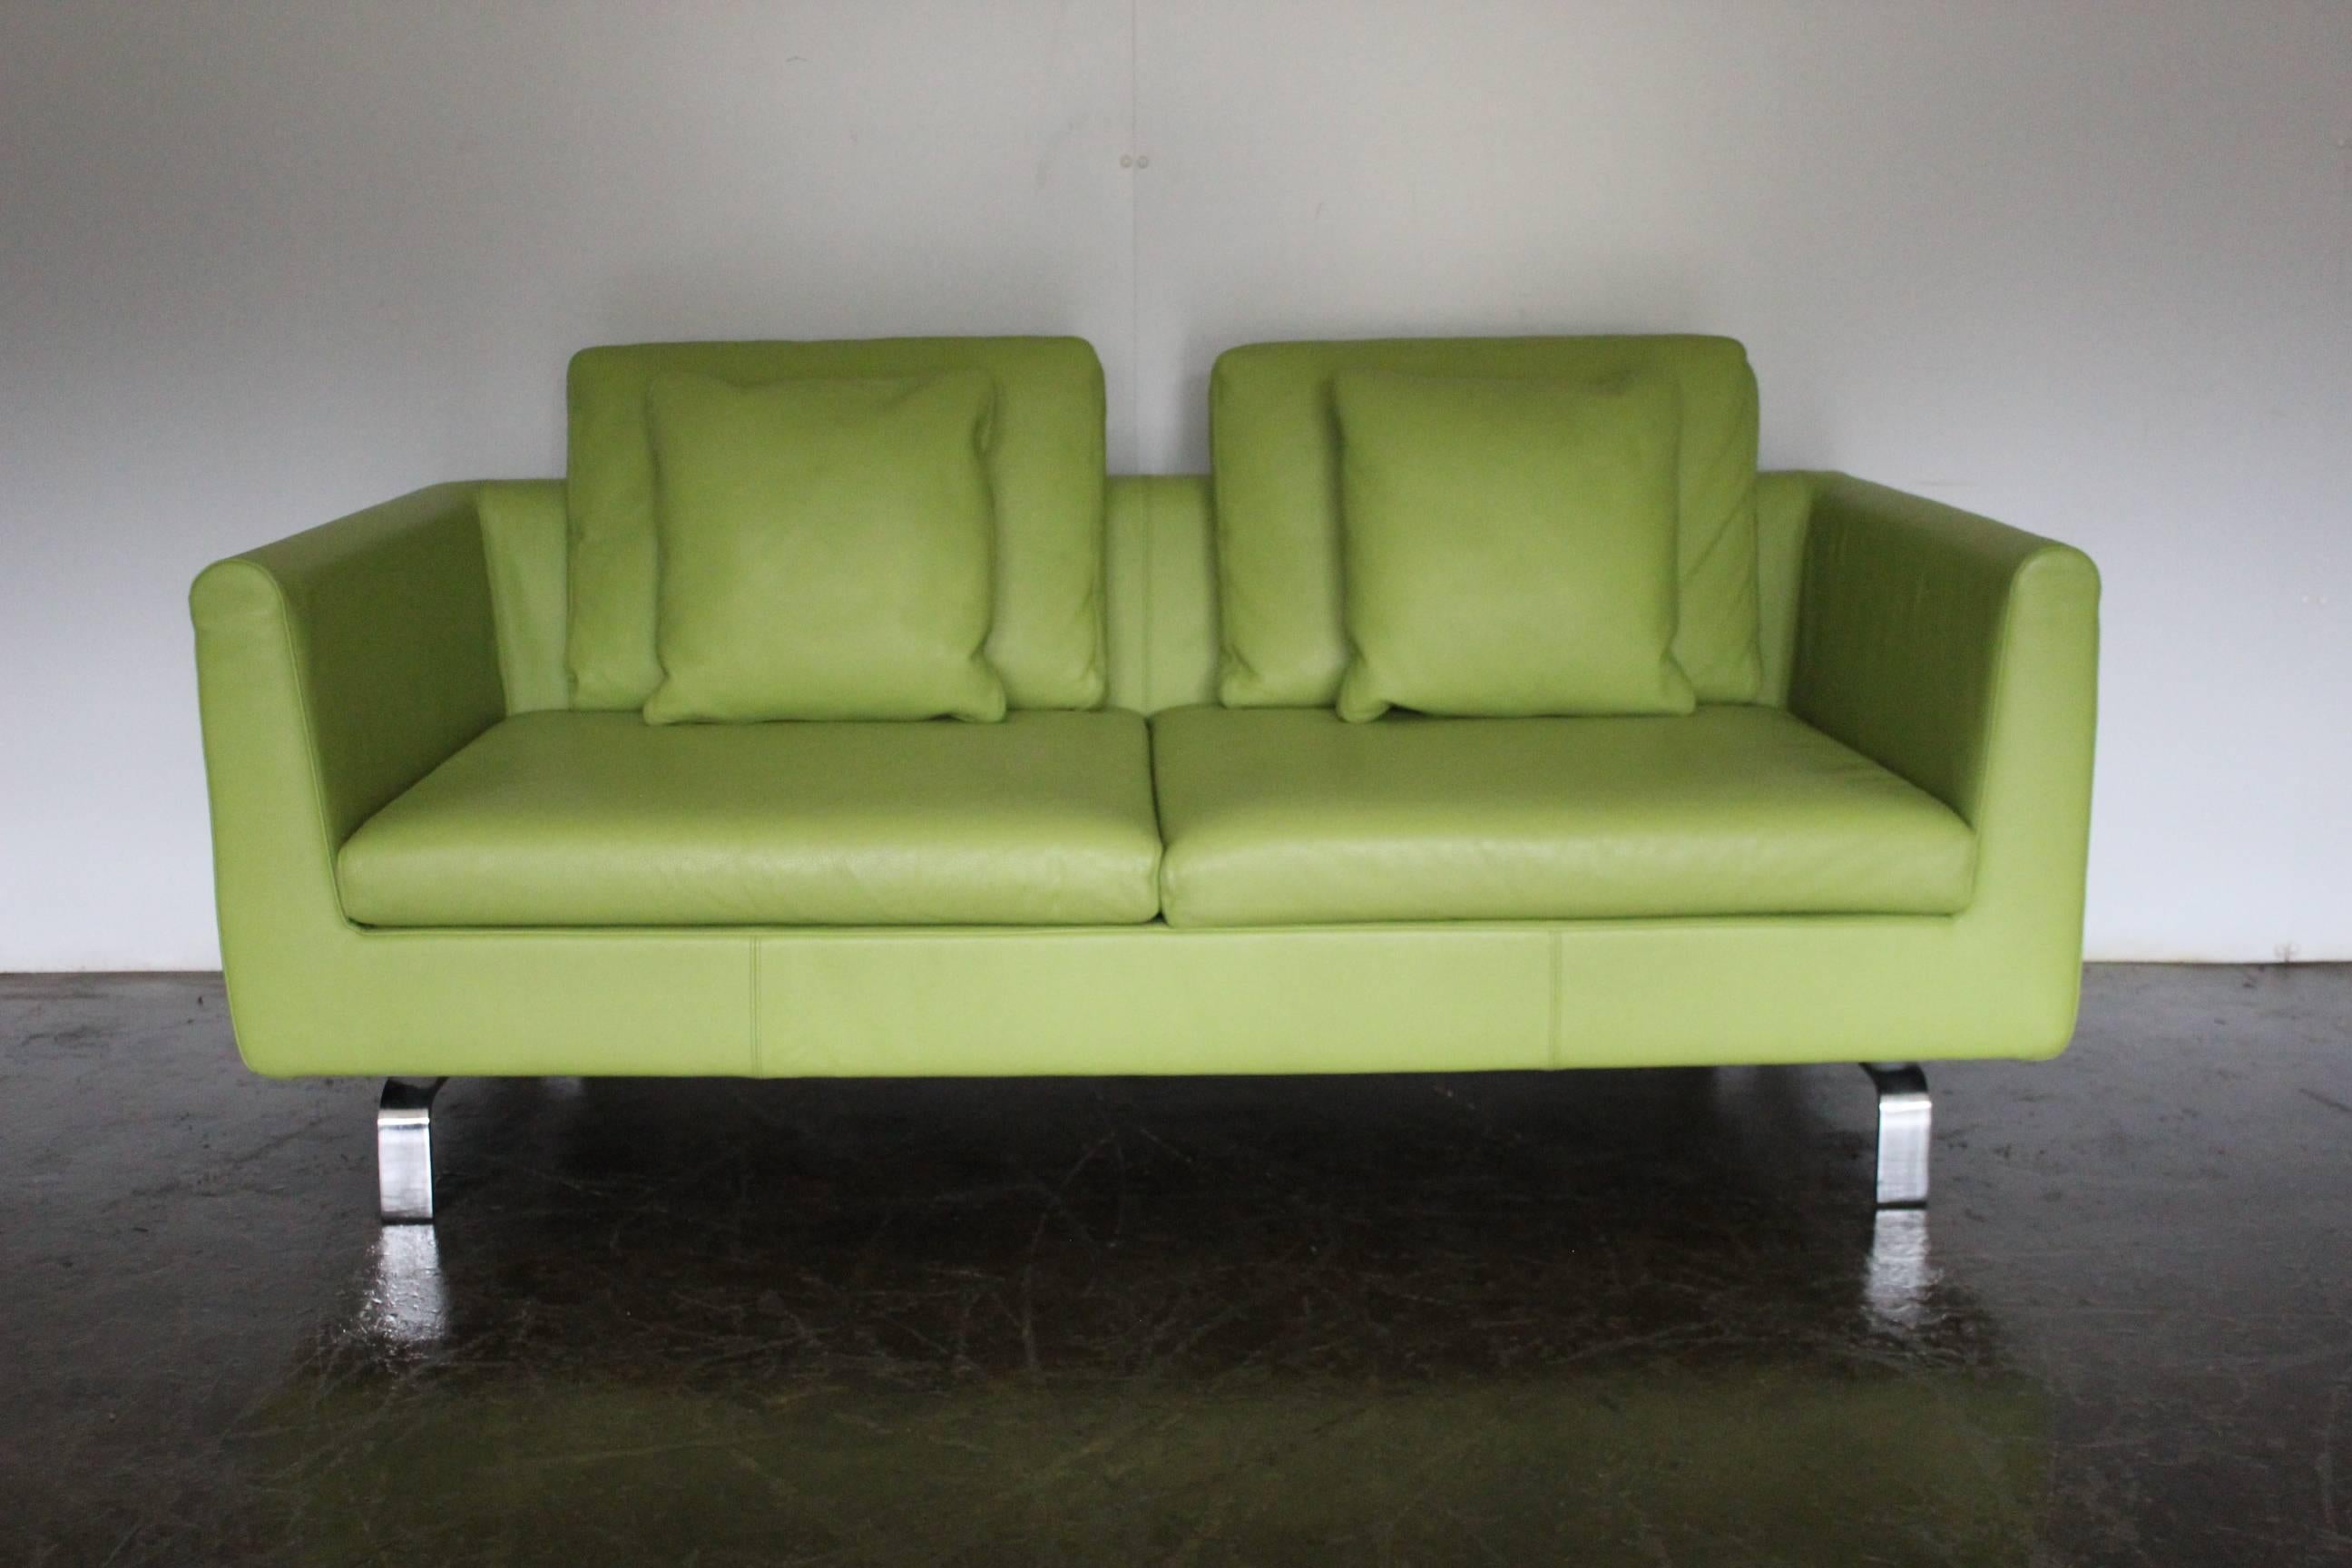 On offer on this occasion is a rare, pristine pair of 2.5-seat sofas, from the world renown German furniture house of Walter Knoll, dressed in a sublime matte Lime-Green leather, and with matte polished-steel framework.

As you will no doubt be